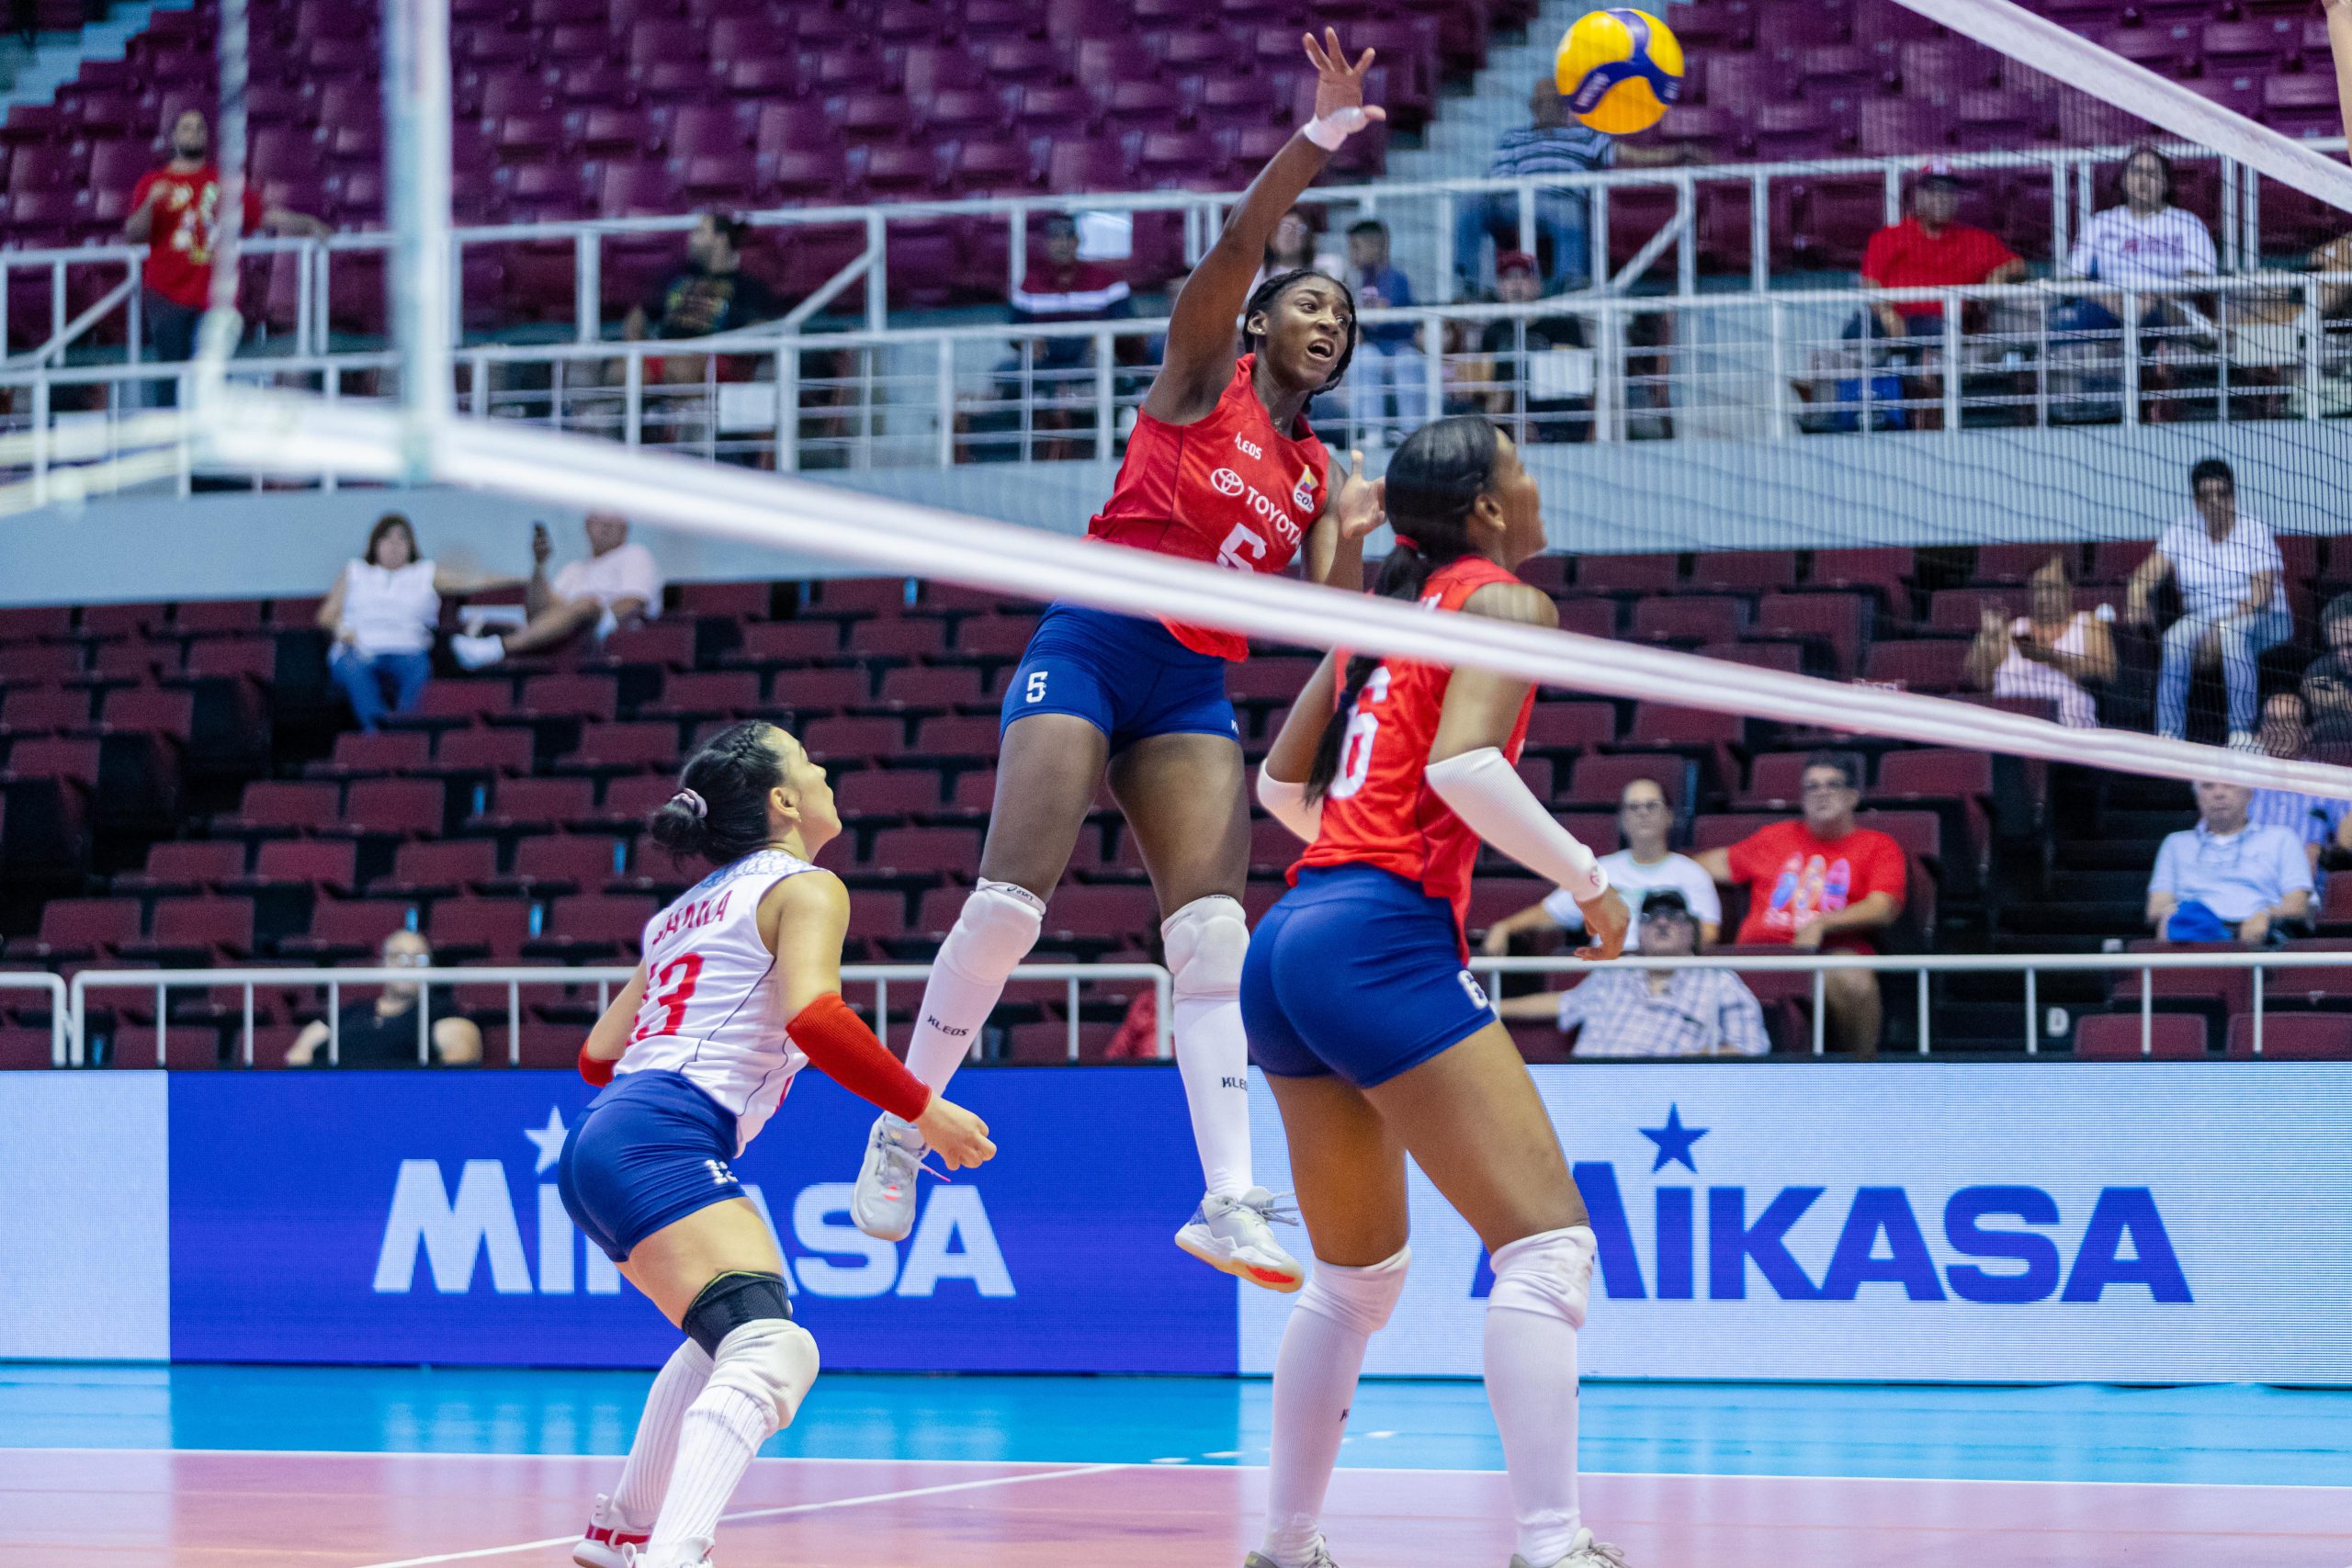 Colombia fifth position with comeback win against Peru 